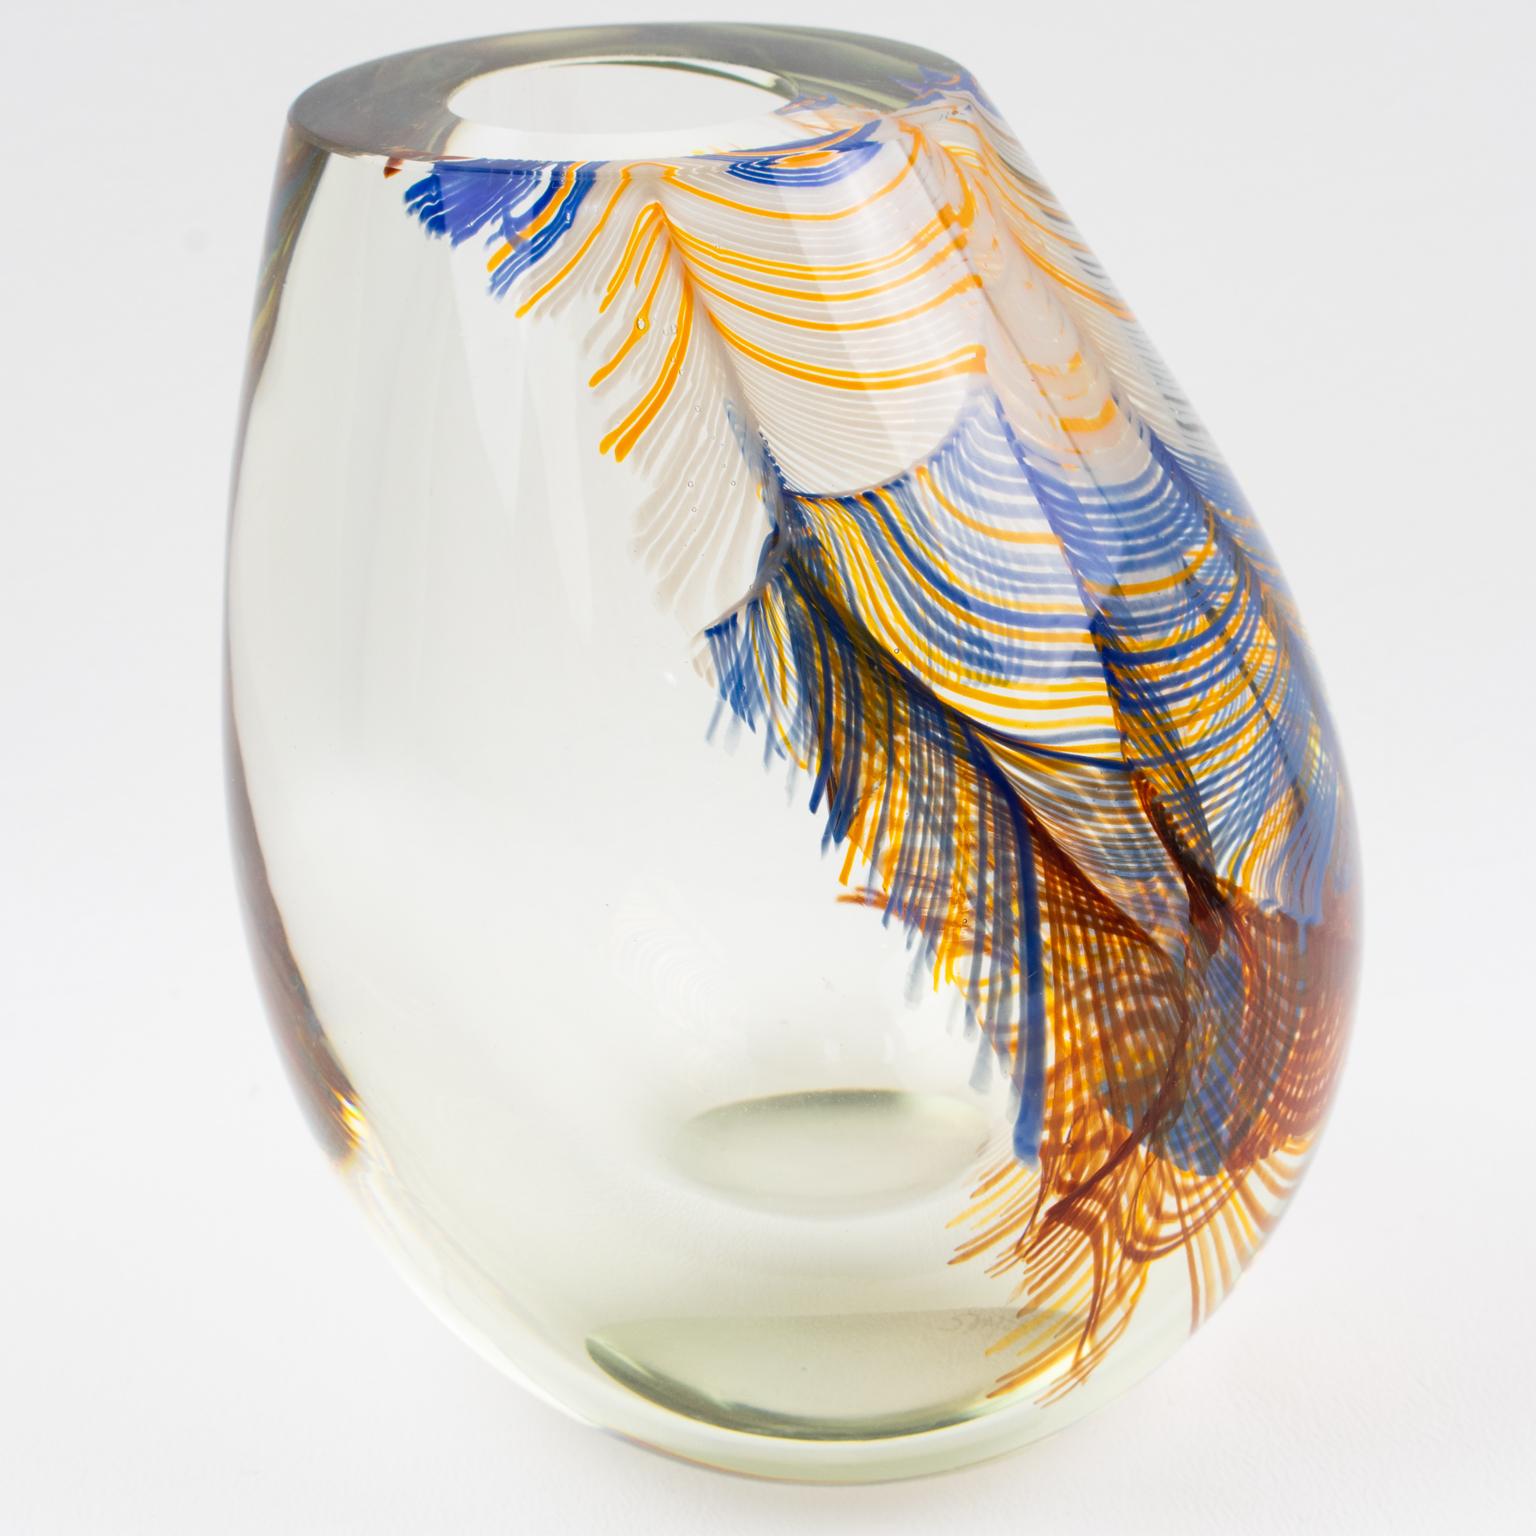 Stephen Smyers Modern Blown Art Glass Vase Abstract Feather Design, 1979 For Sale 5